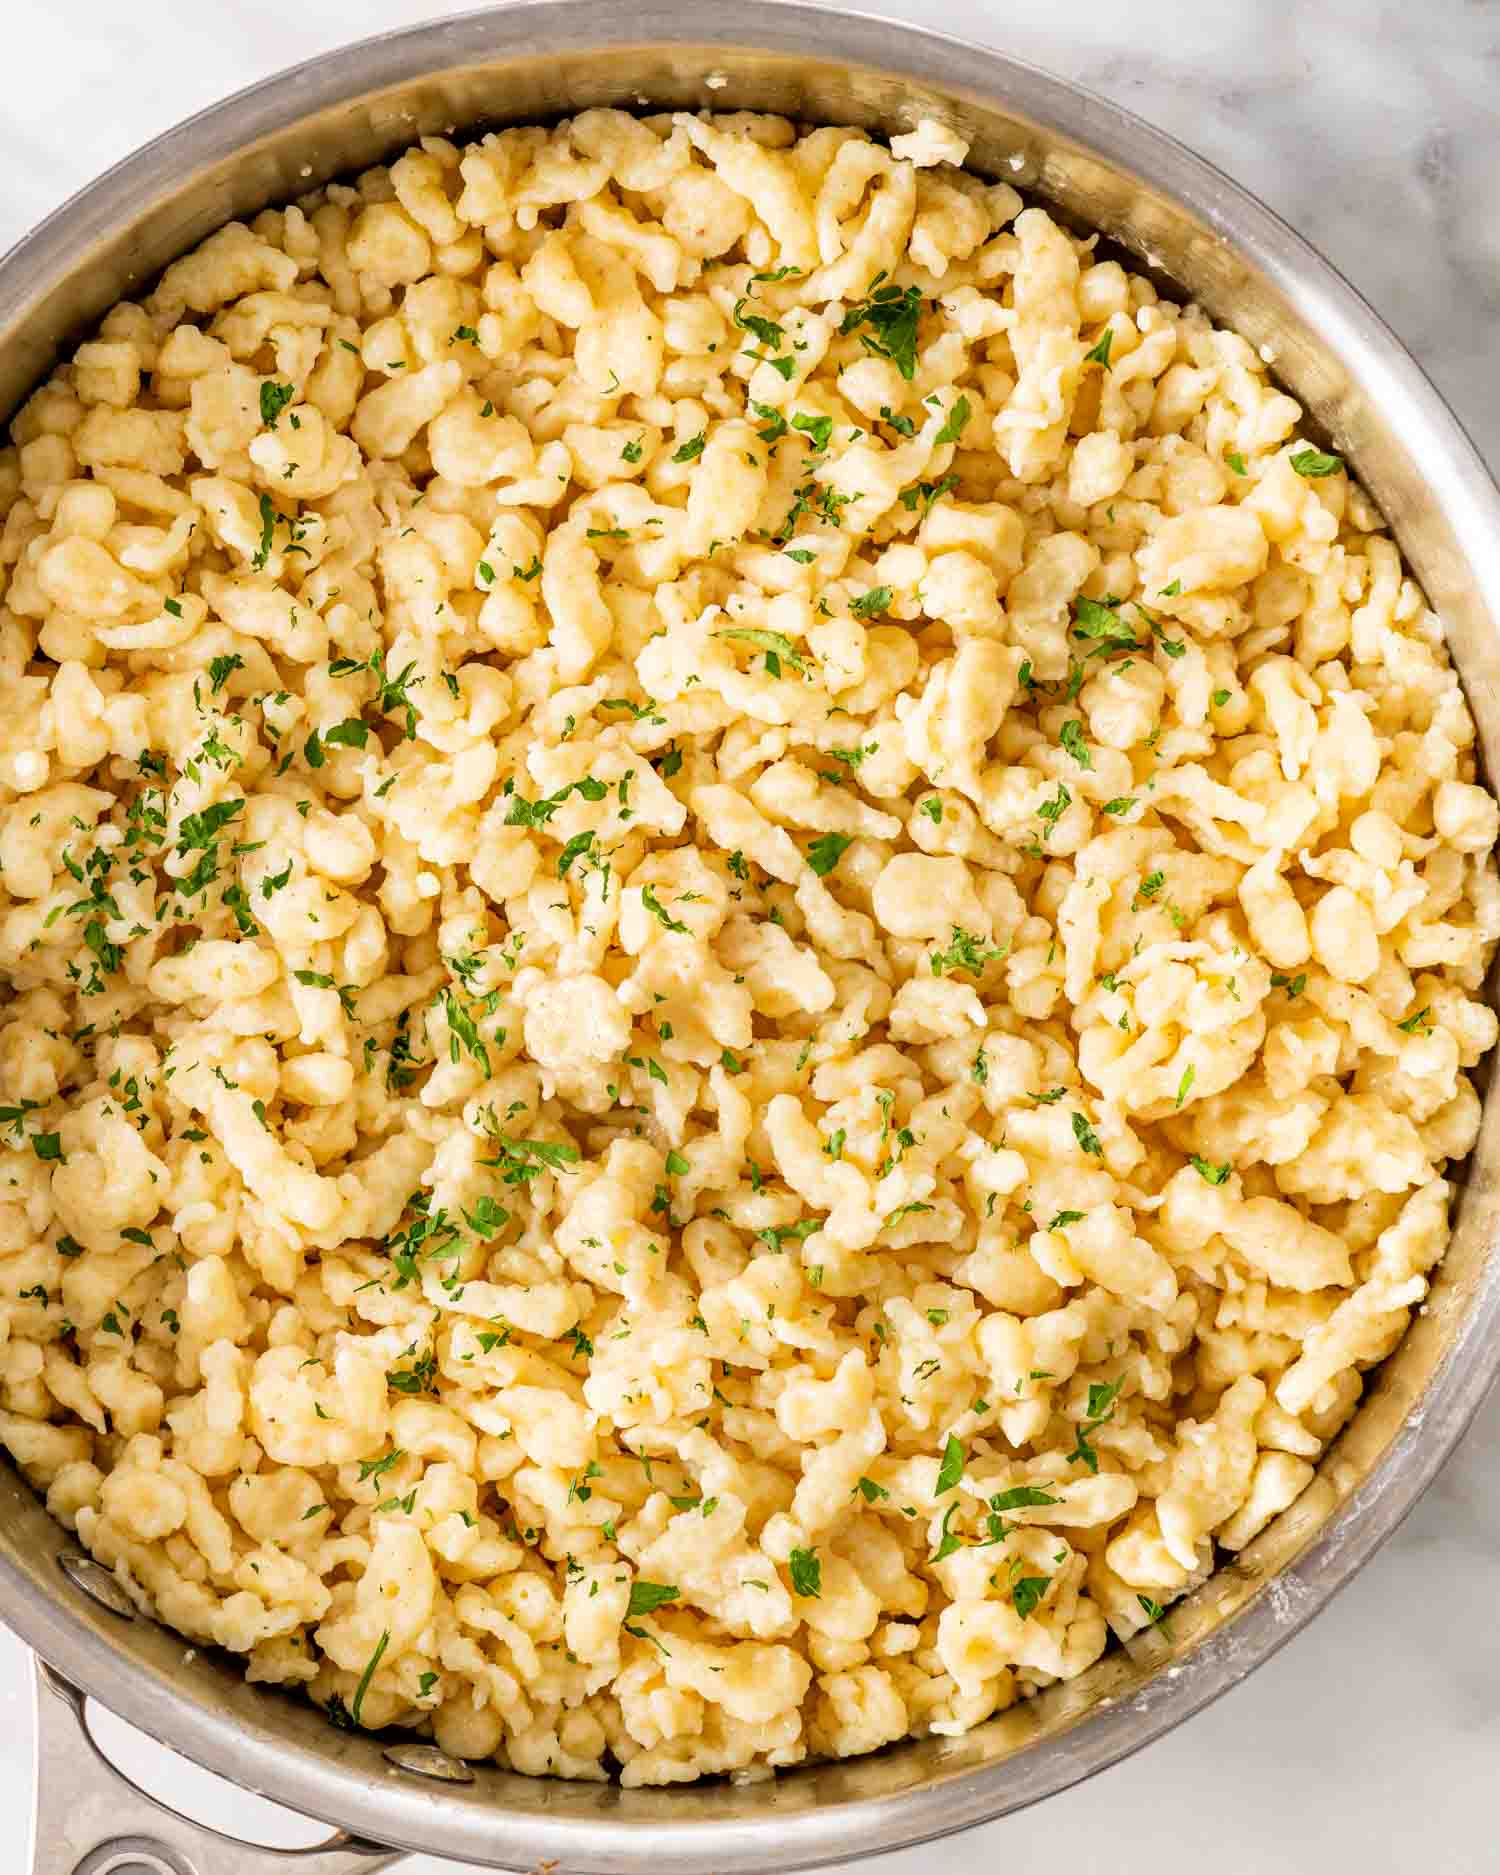 freshly sauteed spaetzle in a skillet garnished with a bit of fresh parsley.